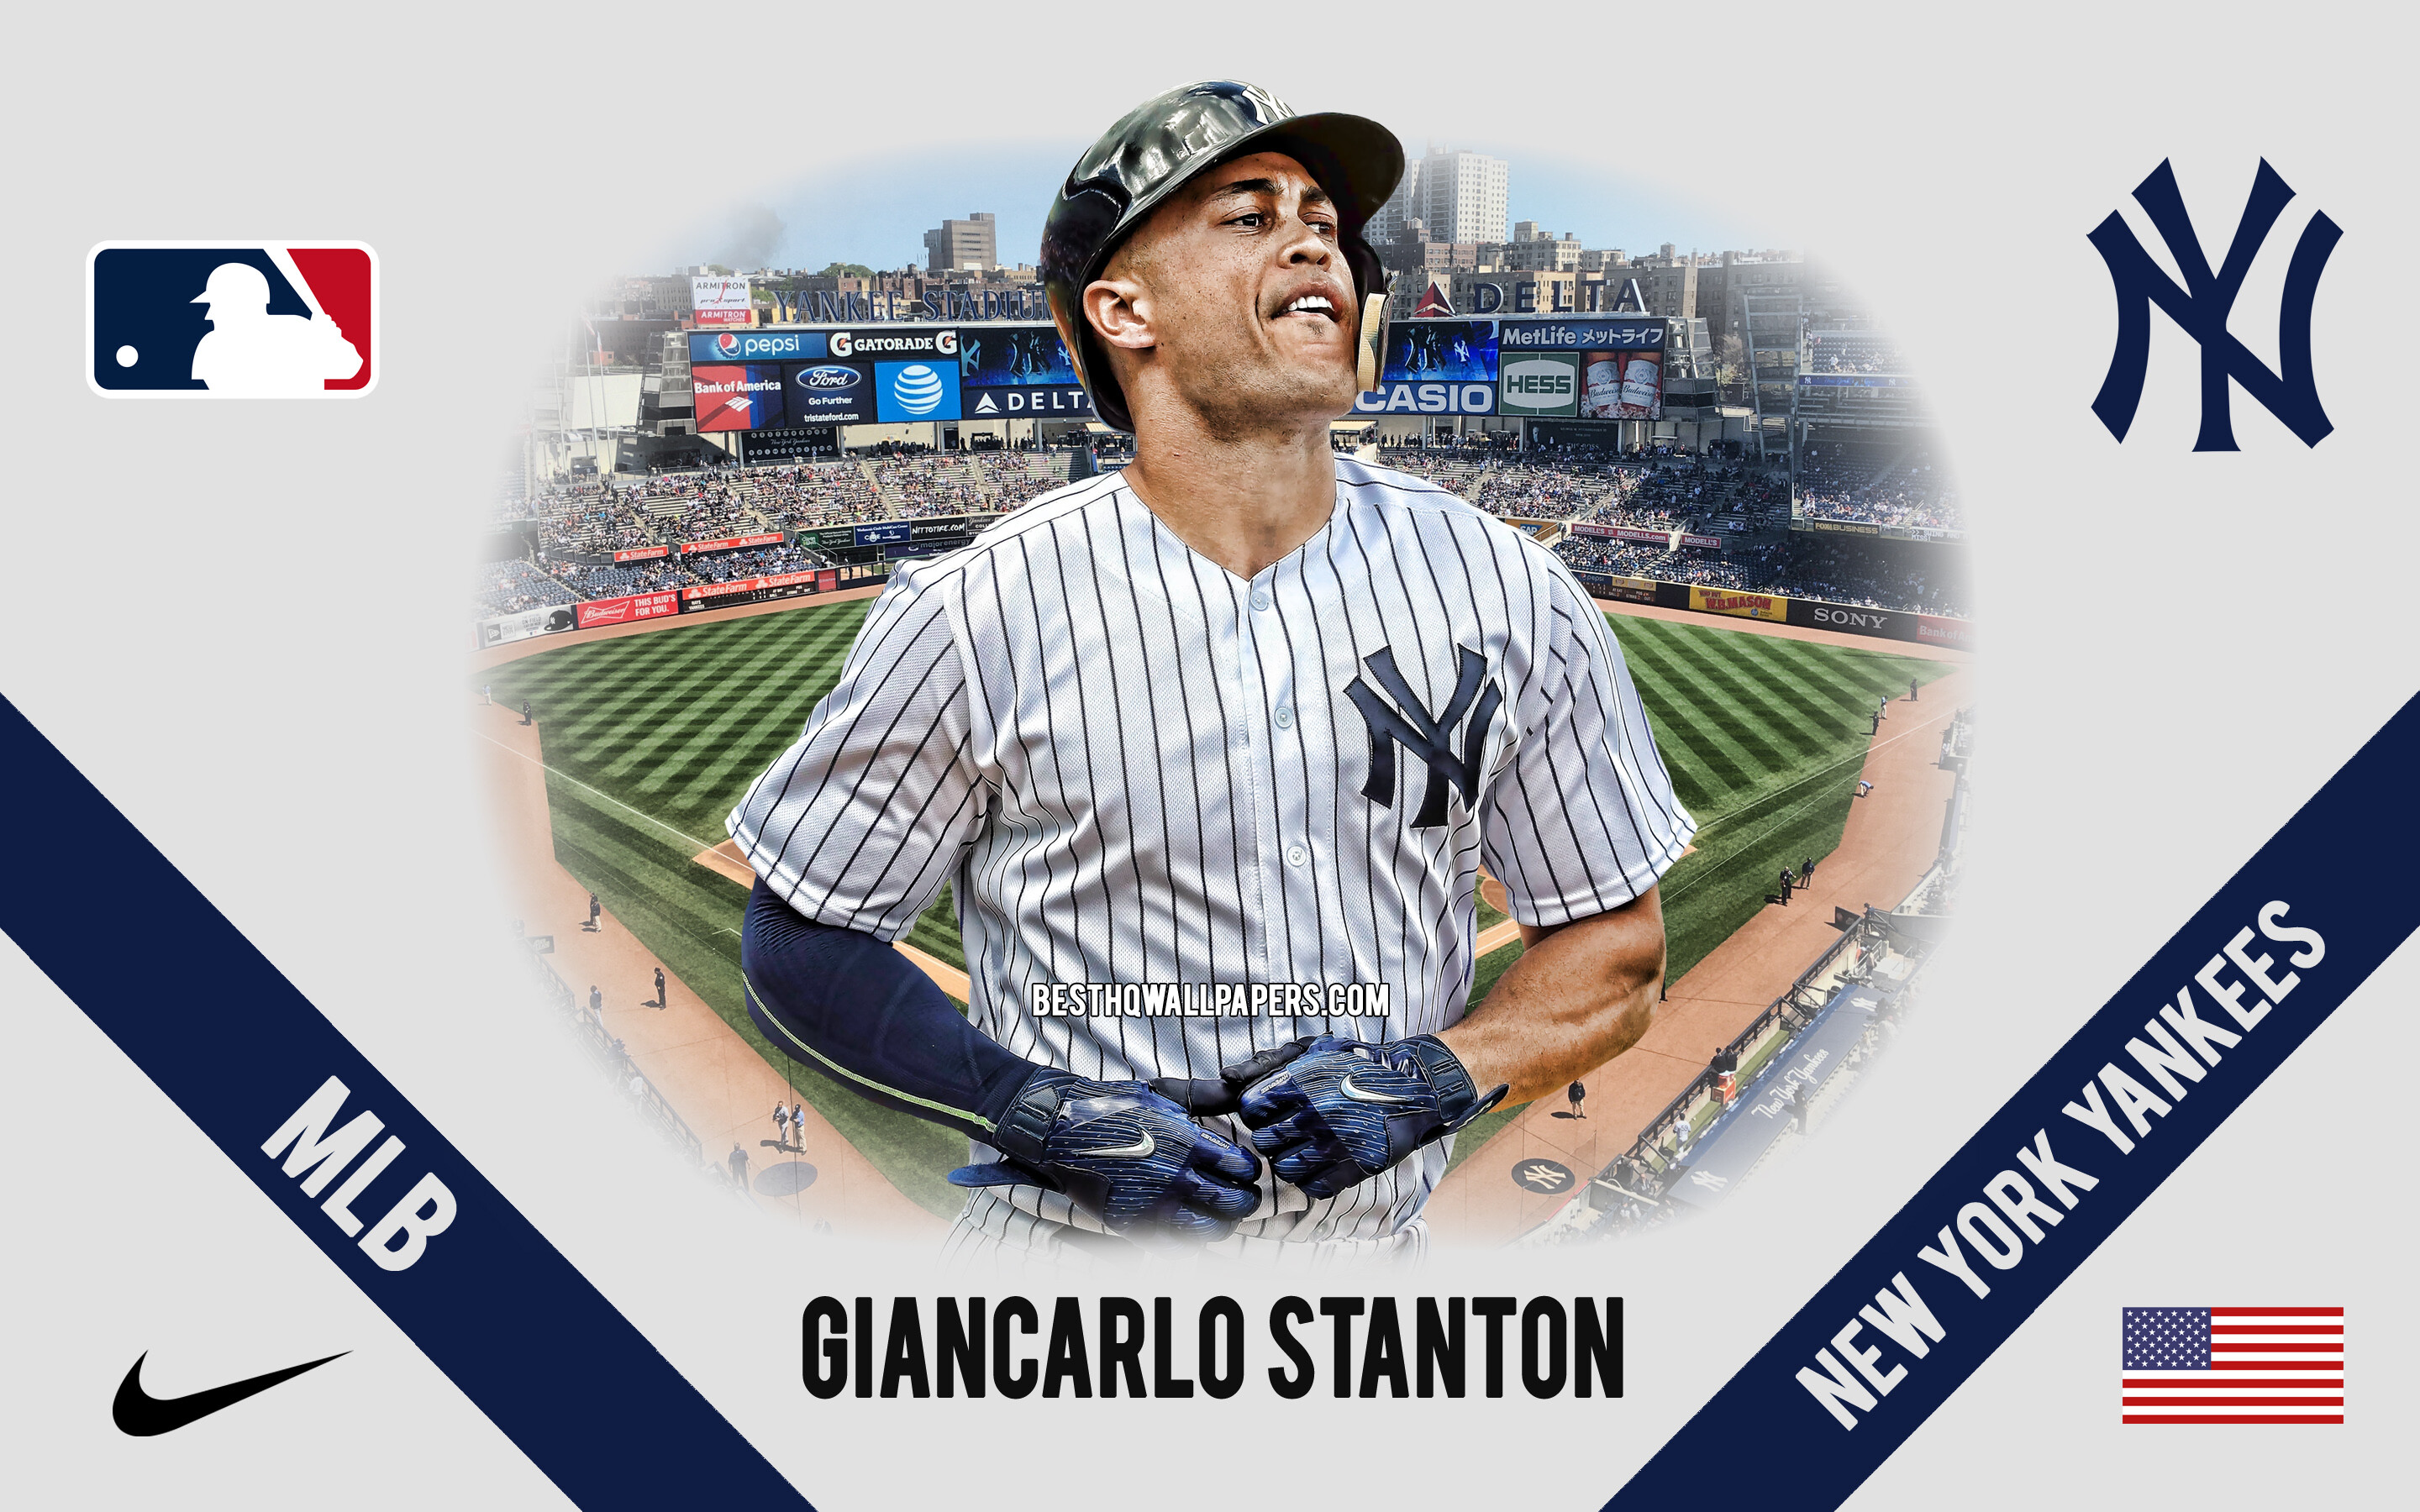 Giancarlo Stanton: An American legend player, Known for his prodigious physical strength and ability to regularly hit long home runs. 2880x1800 HD Wallpaper.